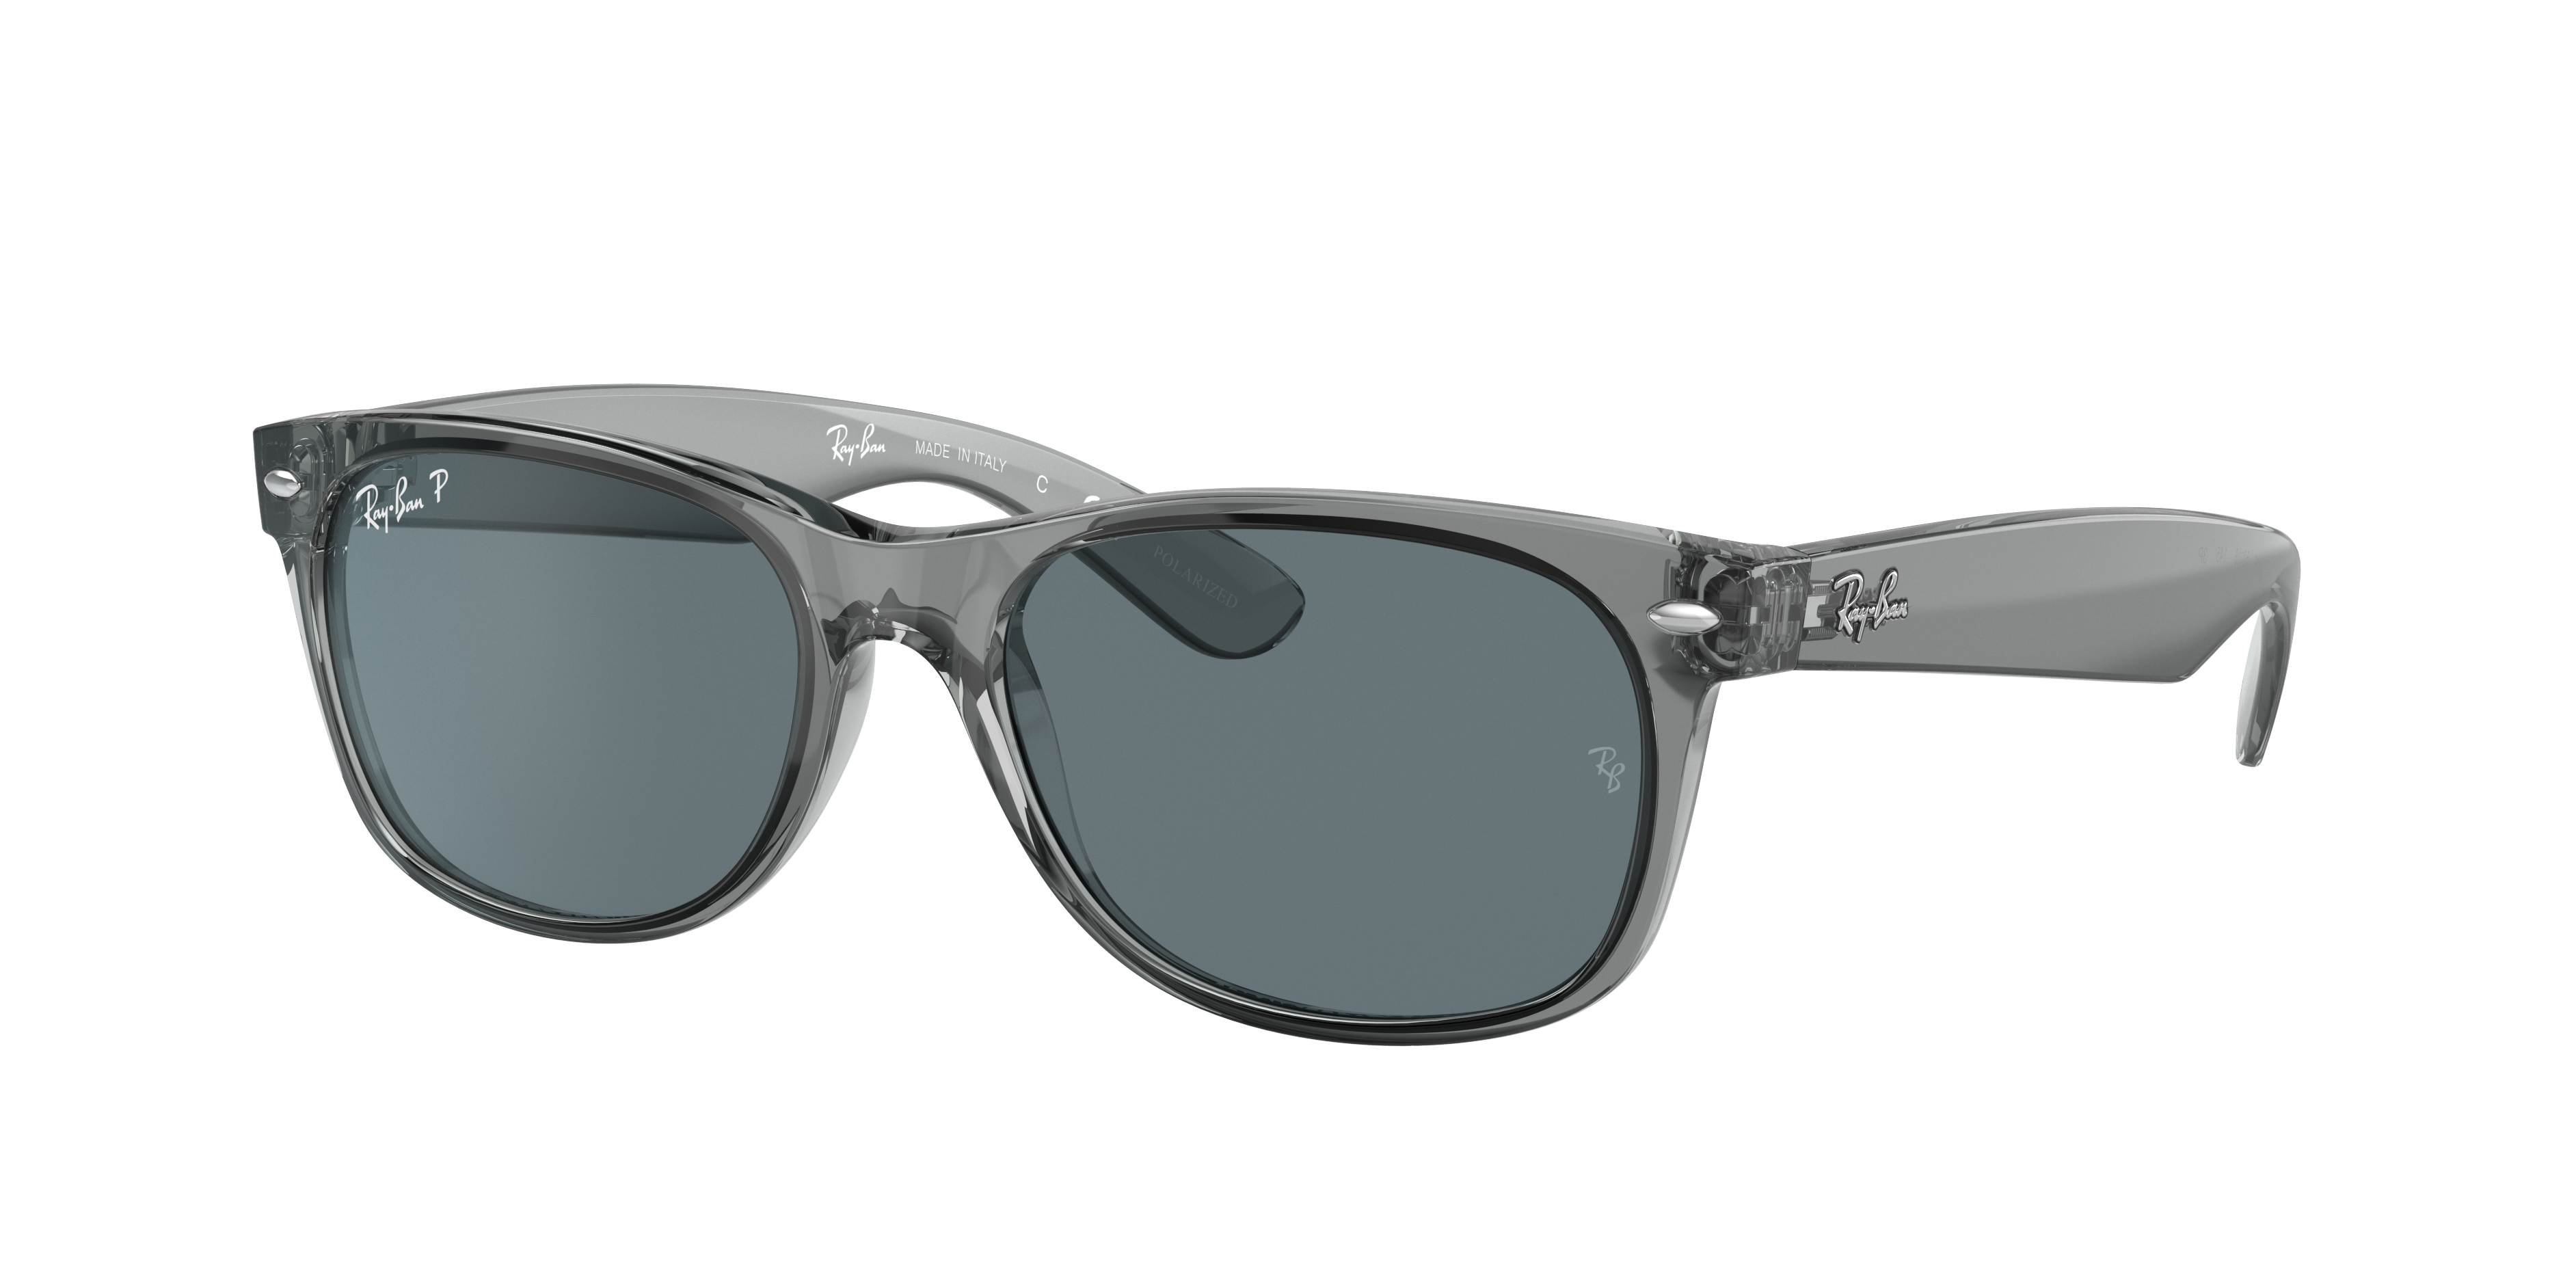 New Wayfarer Classic Sunglasses In Transparent Grey And Blue Ray Ban